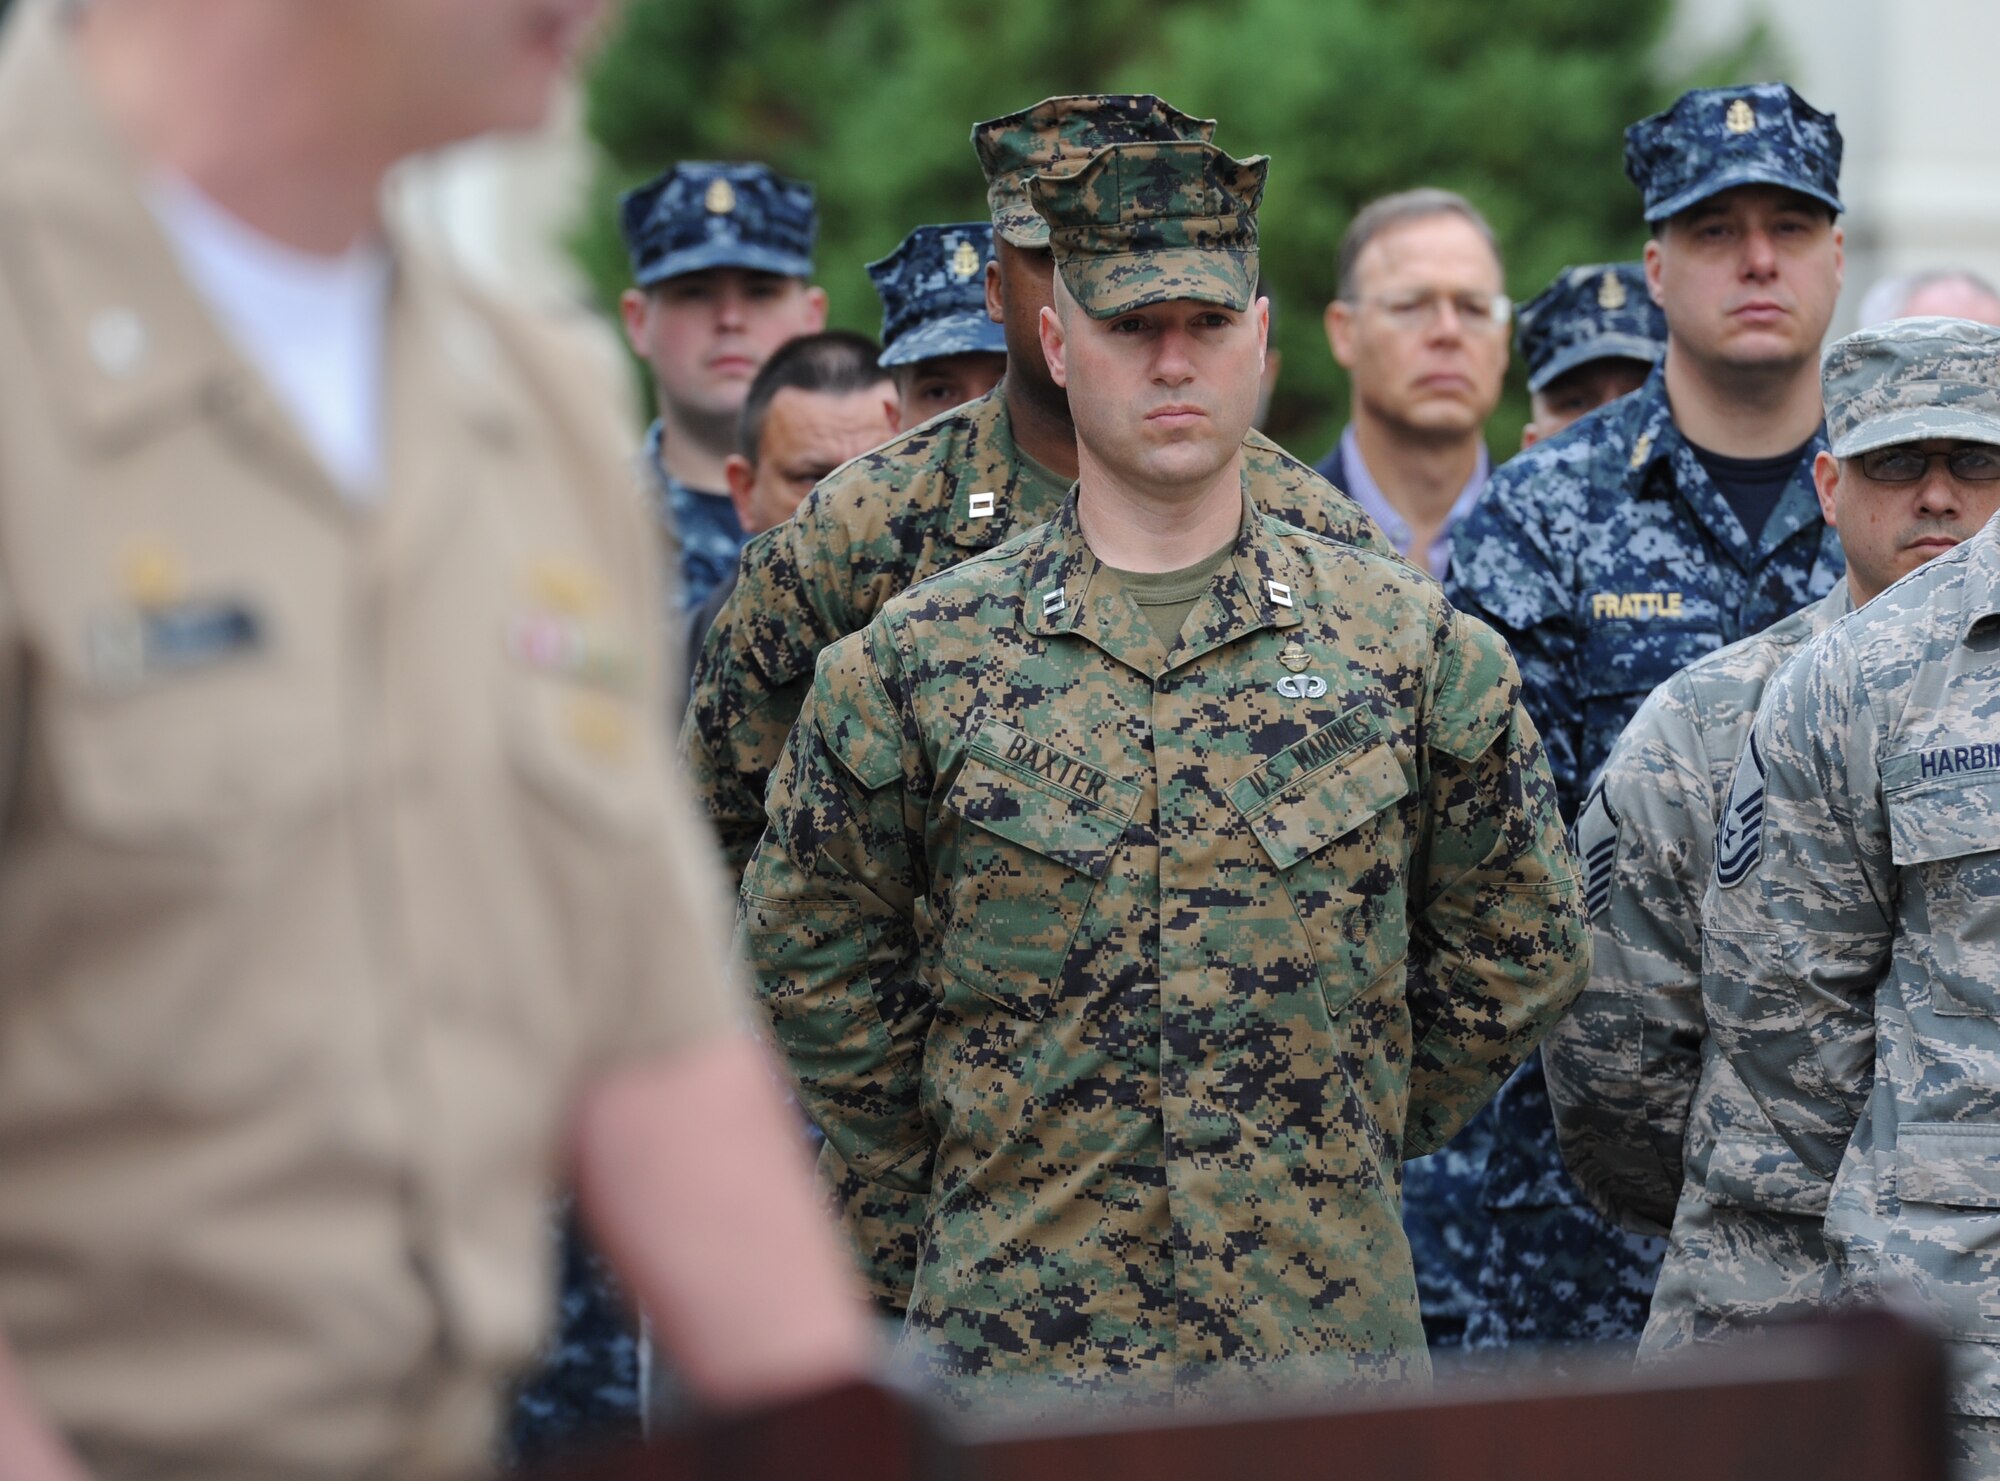 U.S. Marine Corps Capt. Gary Baxter, Keesler Marine Detachment commanding officer, attends a Center for Naval Aviation Technical Training Unit Keesler Pearl Harbor 75th Anniversary Remembrance Ceremony in front of Allee Hall Dec. 7, 2016, on Keesler Air Force Base, Miss. More than 100 Keesler personnel attended the event to honor those lost in the Dec. 7, 1941 Pearl Harbor attacks. (U.S. Air Force photo by Kemberly Groue)